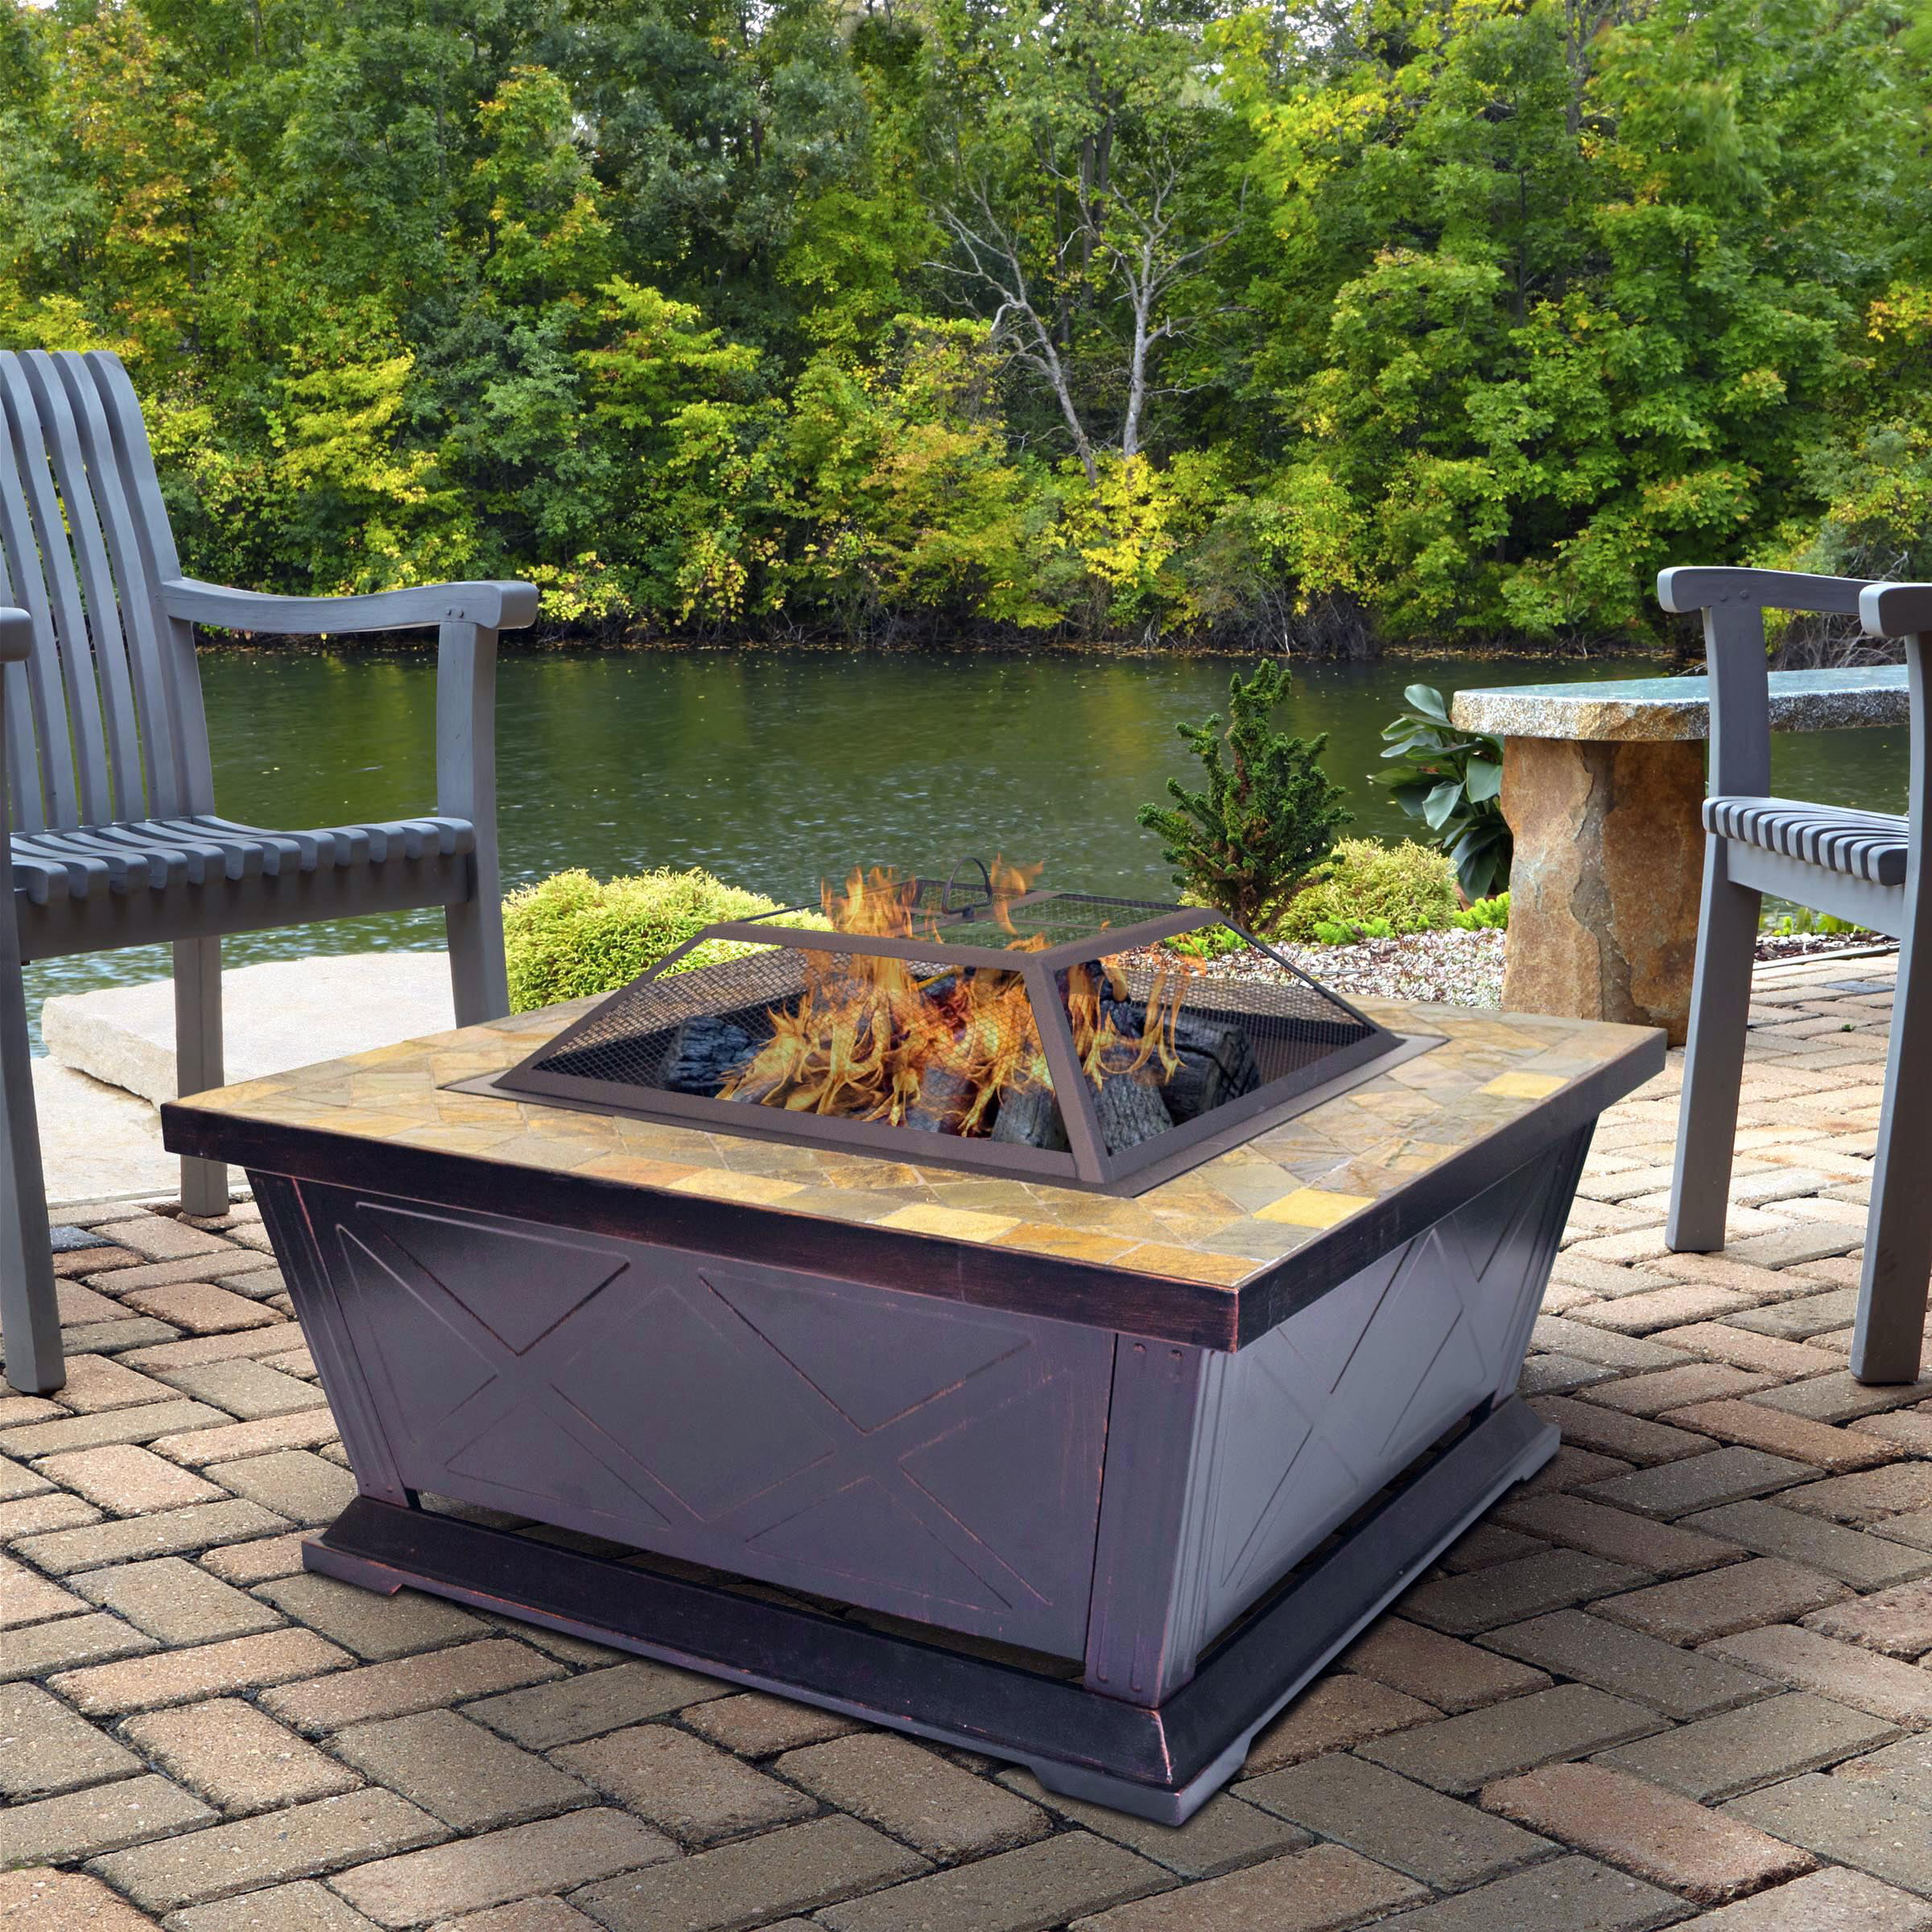 Outdoor Leisure Products 36 Inch Square Steel Fire Pit With Decorative Slate Hearth And Oil Rubbed Bronze Finish Walmart Com